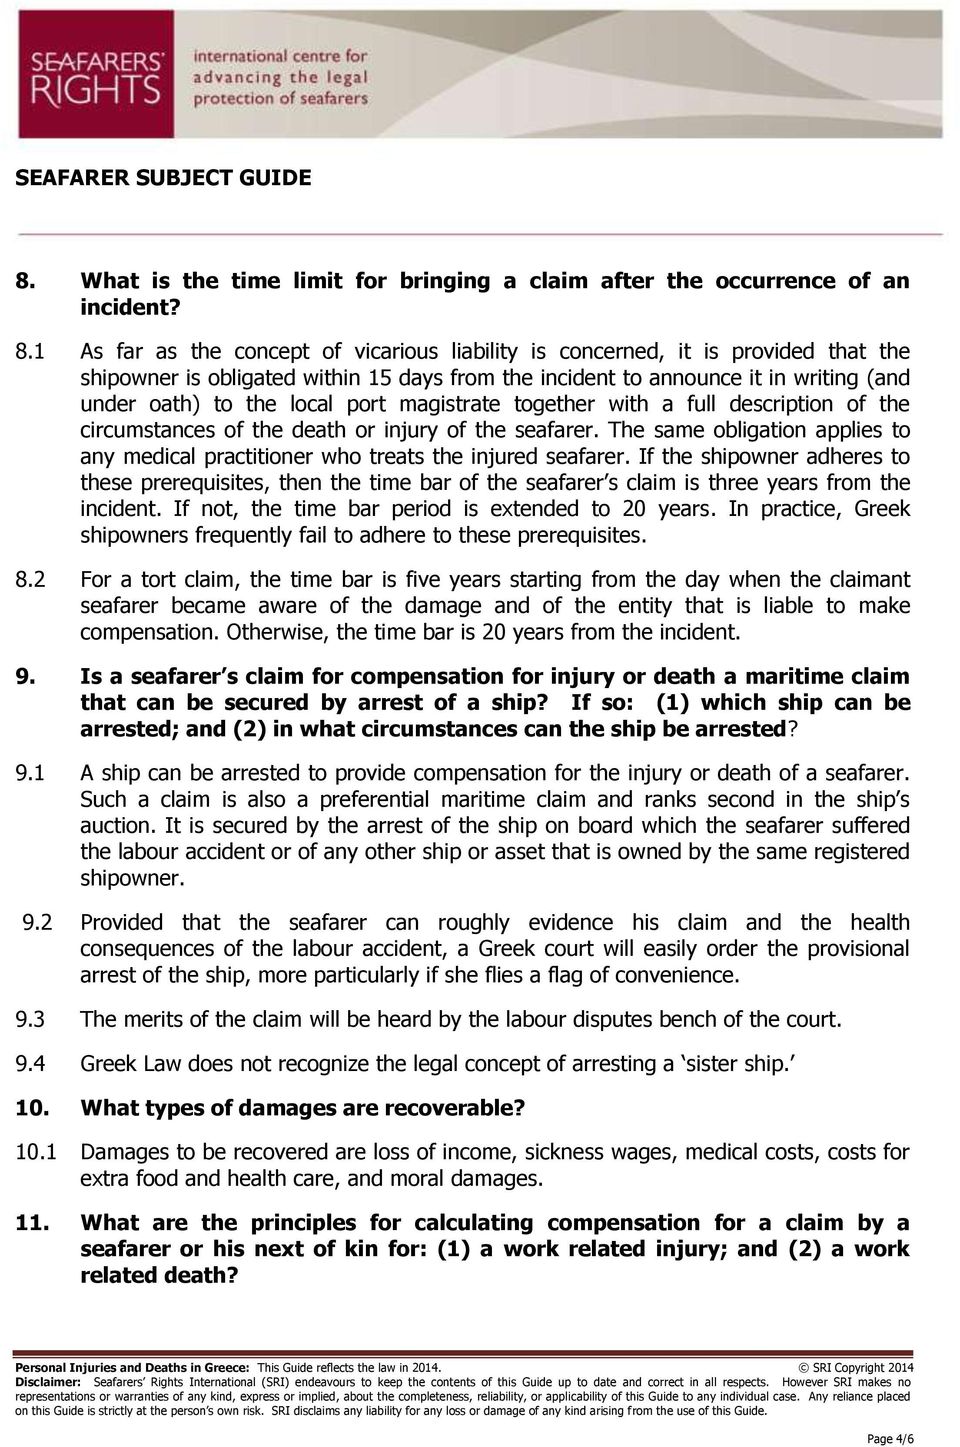 port magistrate together with a full description of the circumstances of the death or injury of the seafarer. The same obligation applies to any medical practitioner who treats the injured seafarer.